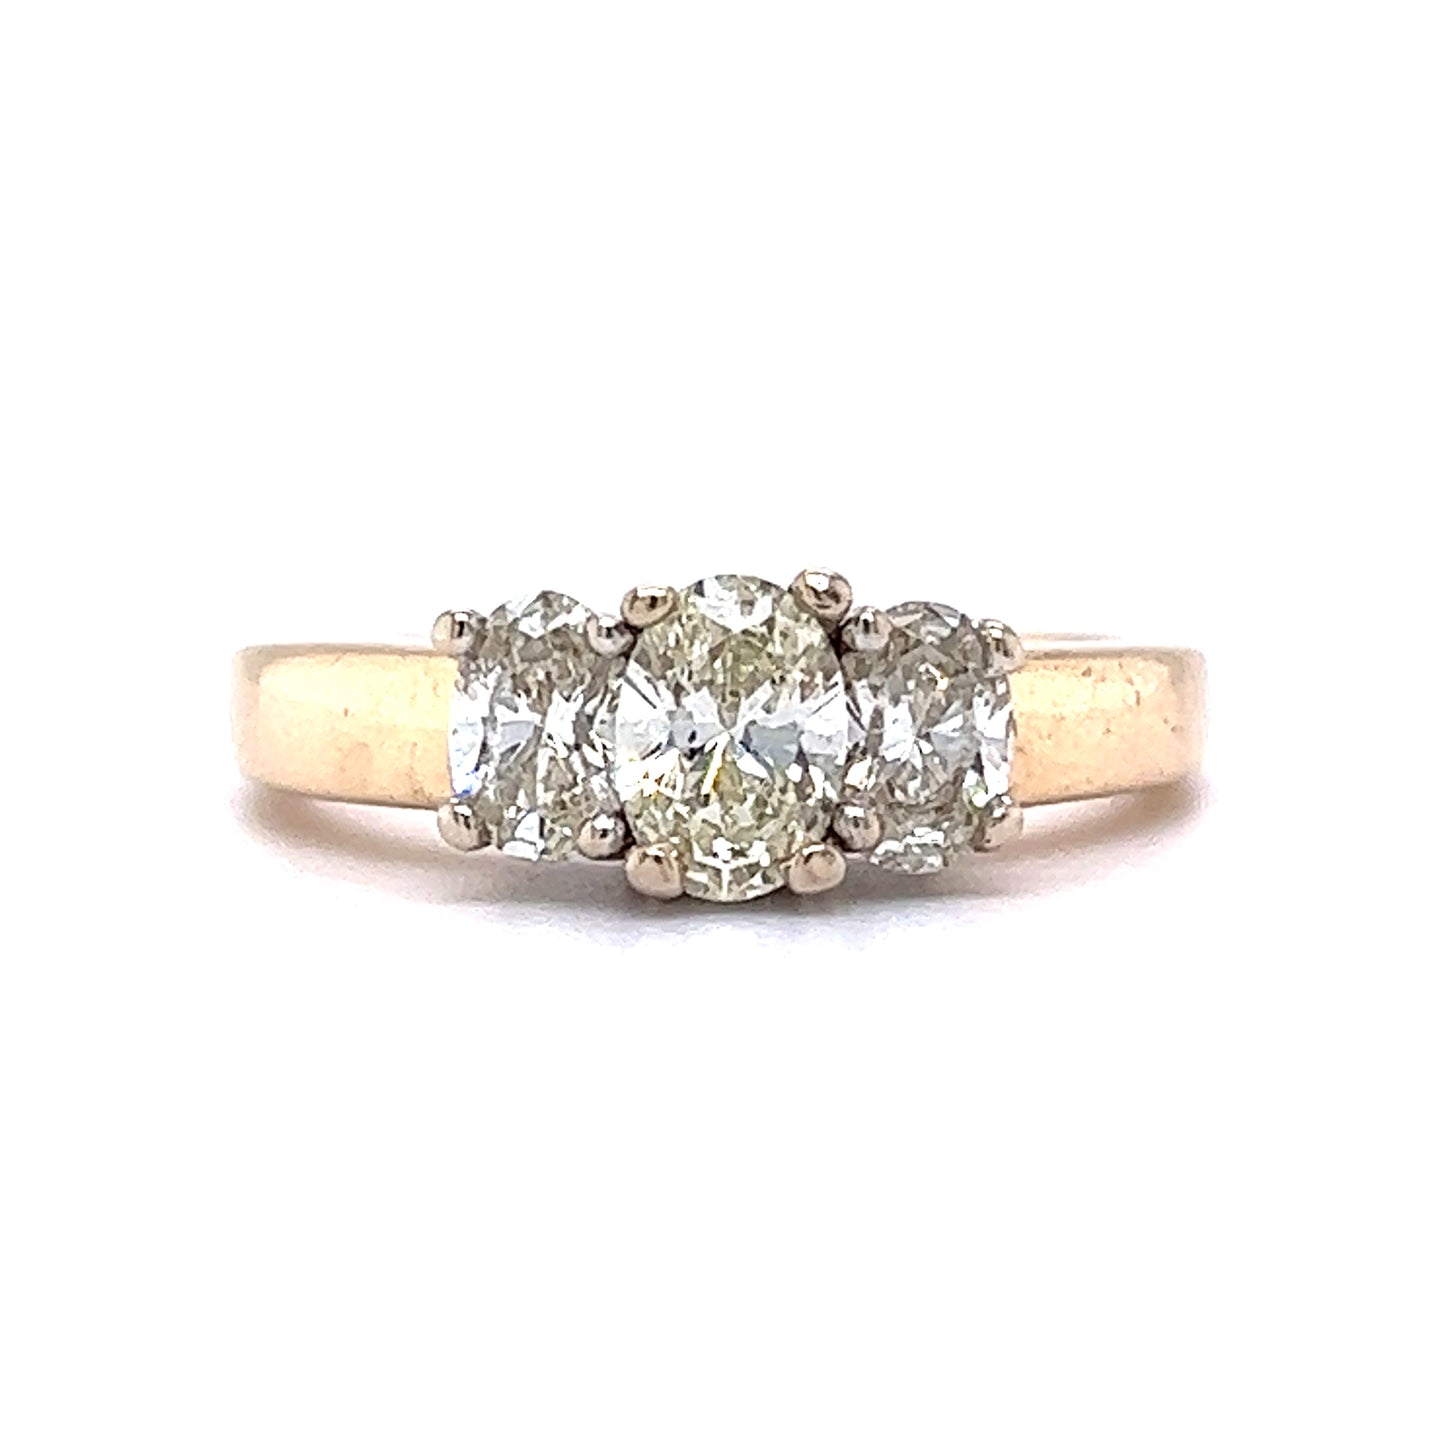 Oval Cut Three Stone Diamond Engagement Ring in 14k Gold